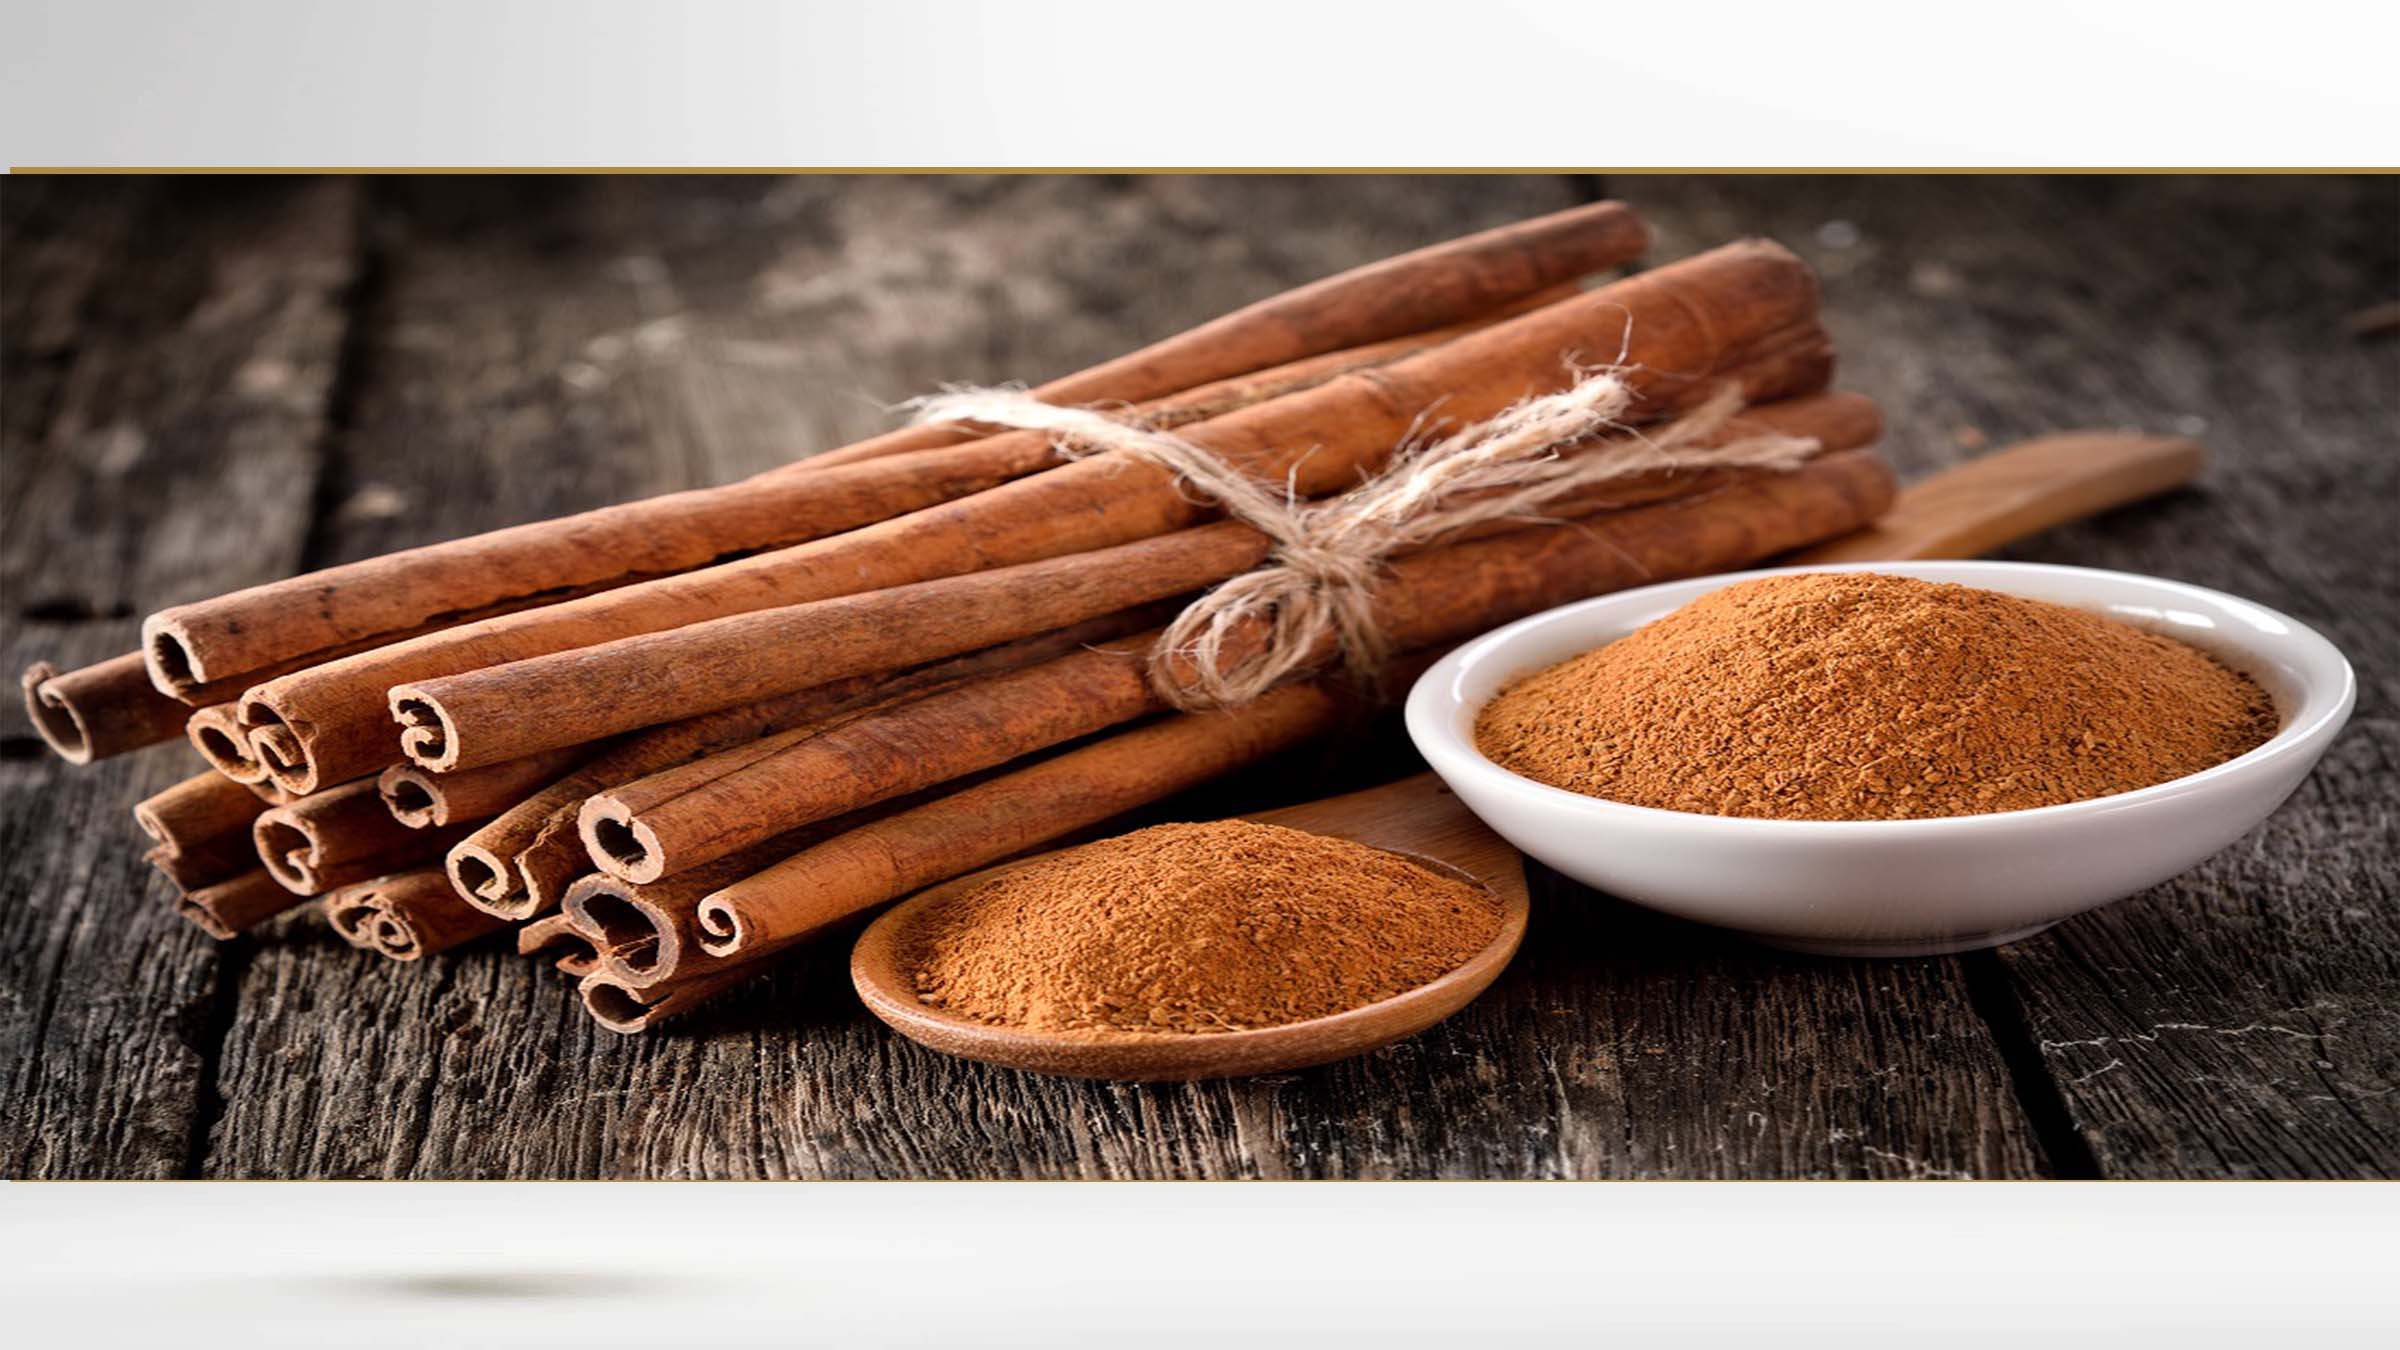 Does cinnamon affect weight loss?